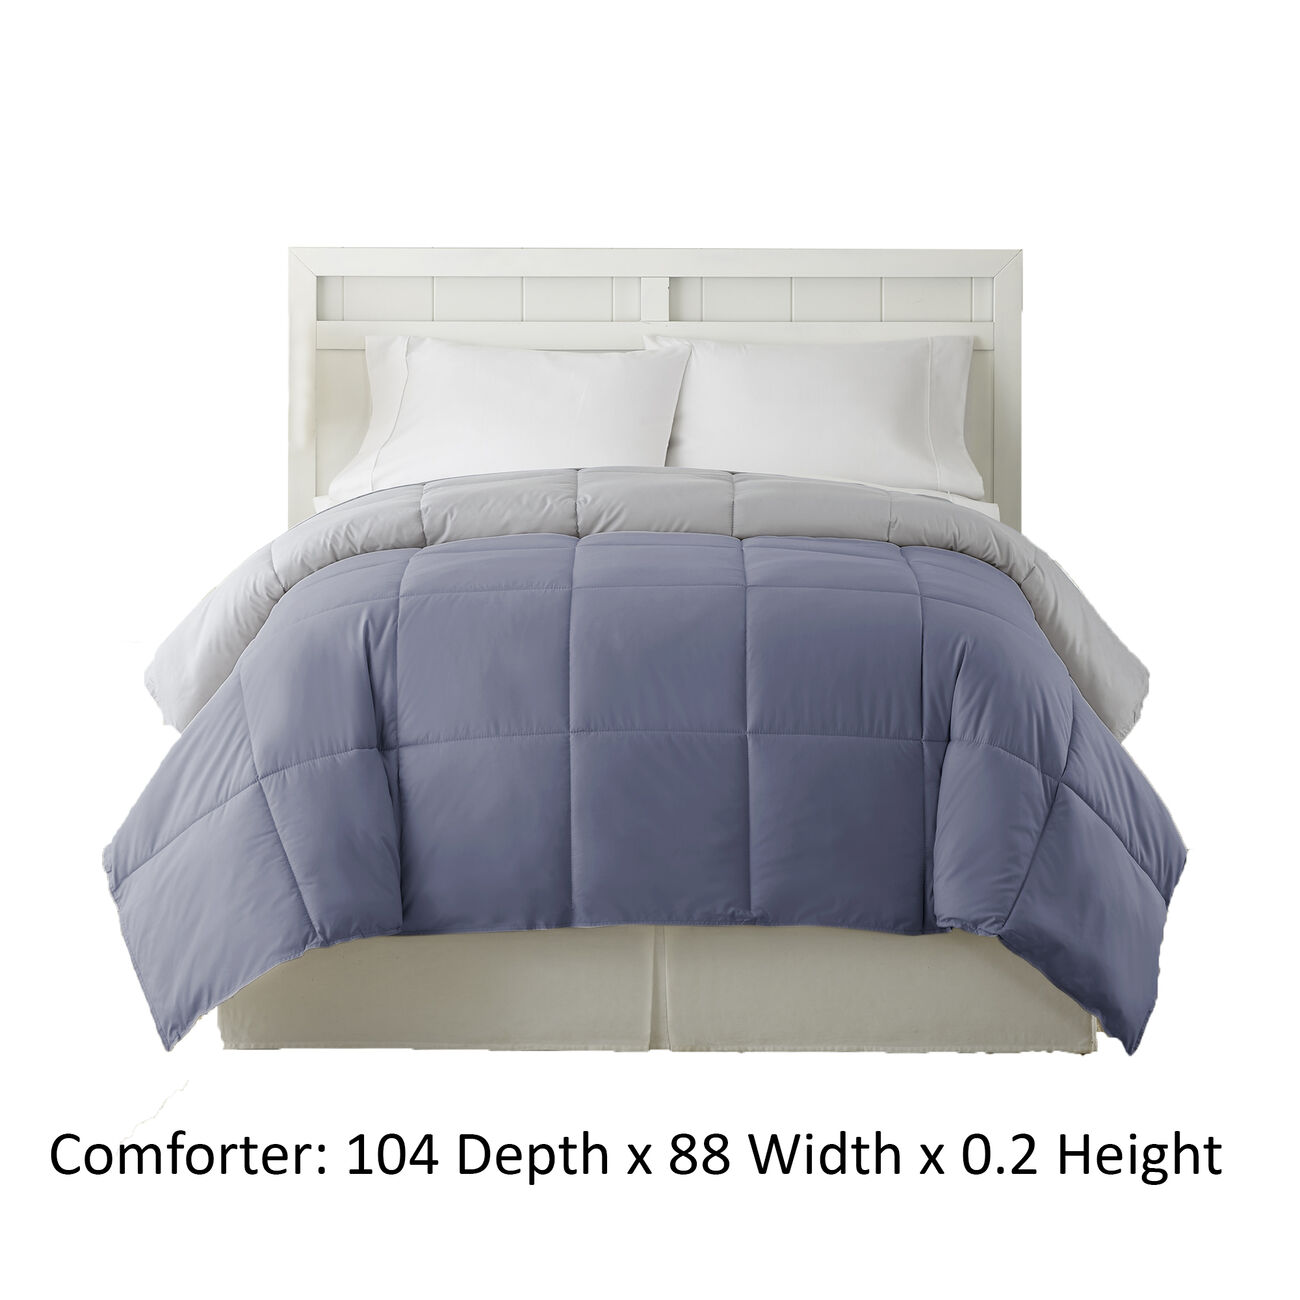 Genoa Reversible King Comforter with Box Quilted The Urban Port, Silver and Blue